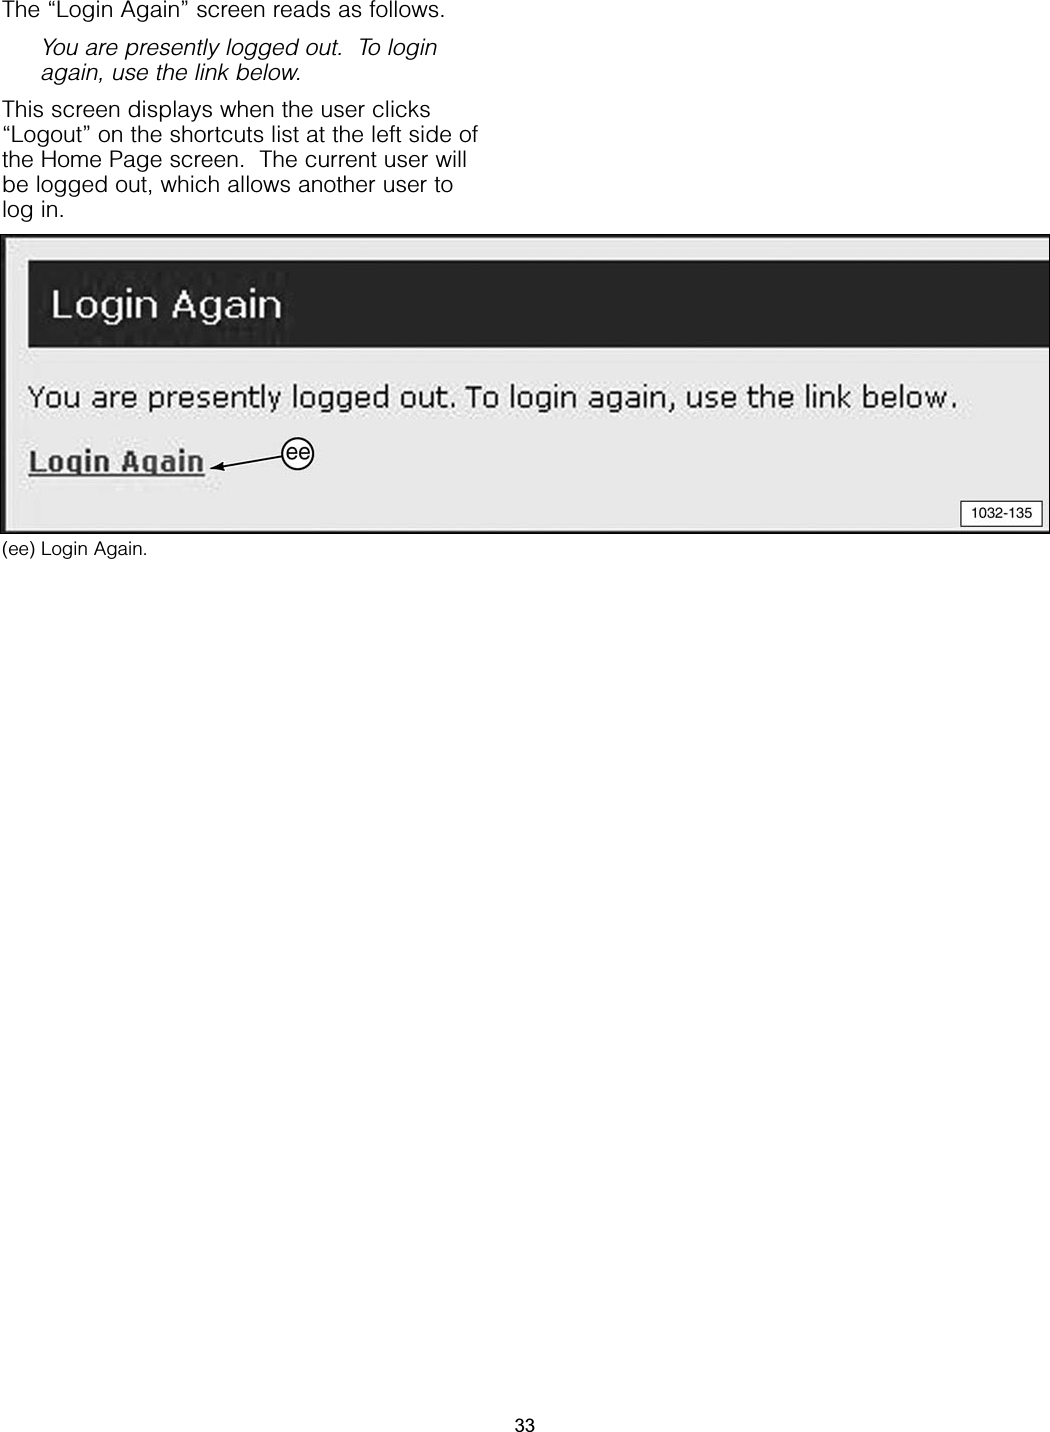 The “Login Again” screen reads as follows.You are presently logged out.  To loginagain, use the link below.This screen displays when the user clicks“Logout” on the shortcuts list at the left side ofthe Home Page screen.  The current user willbe logged out, which allows another user tolog in.(ee) Login Again.33